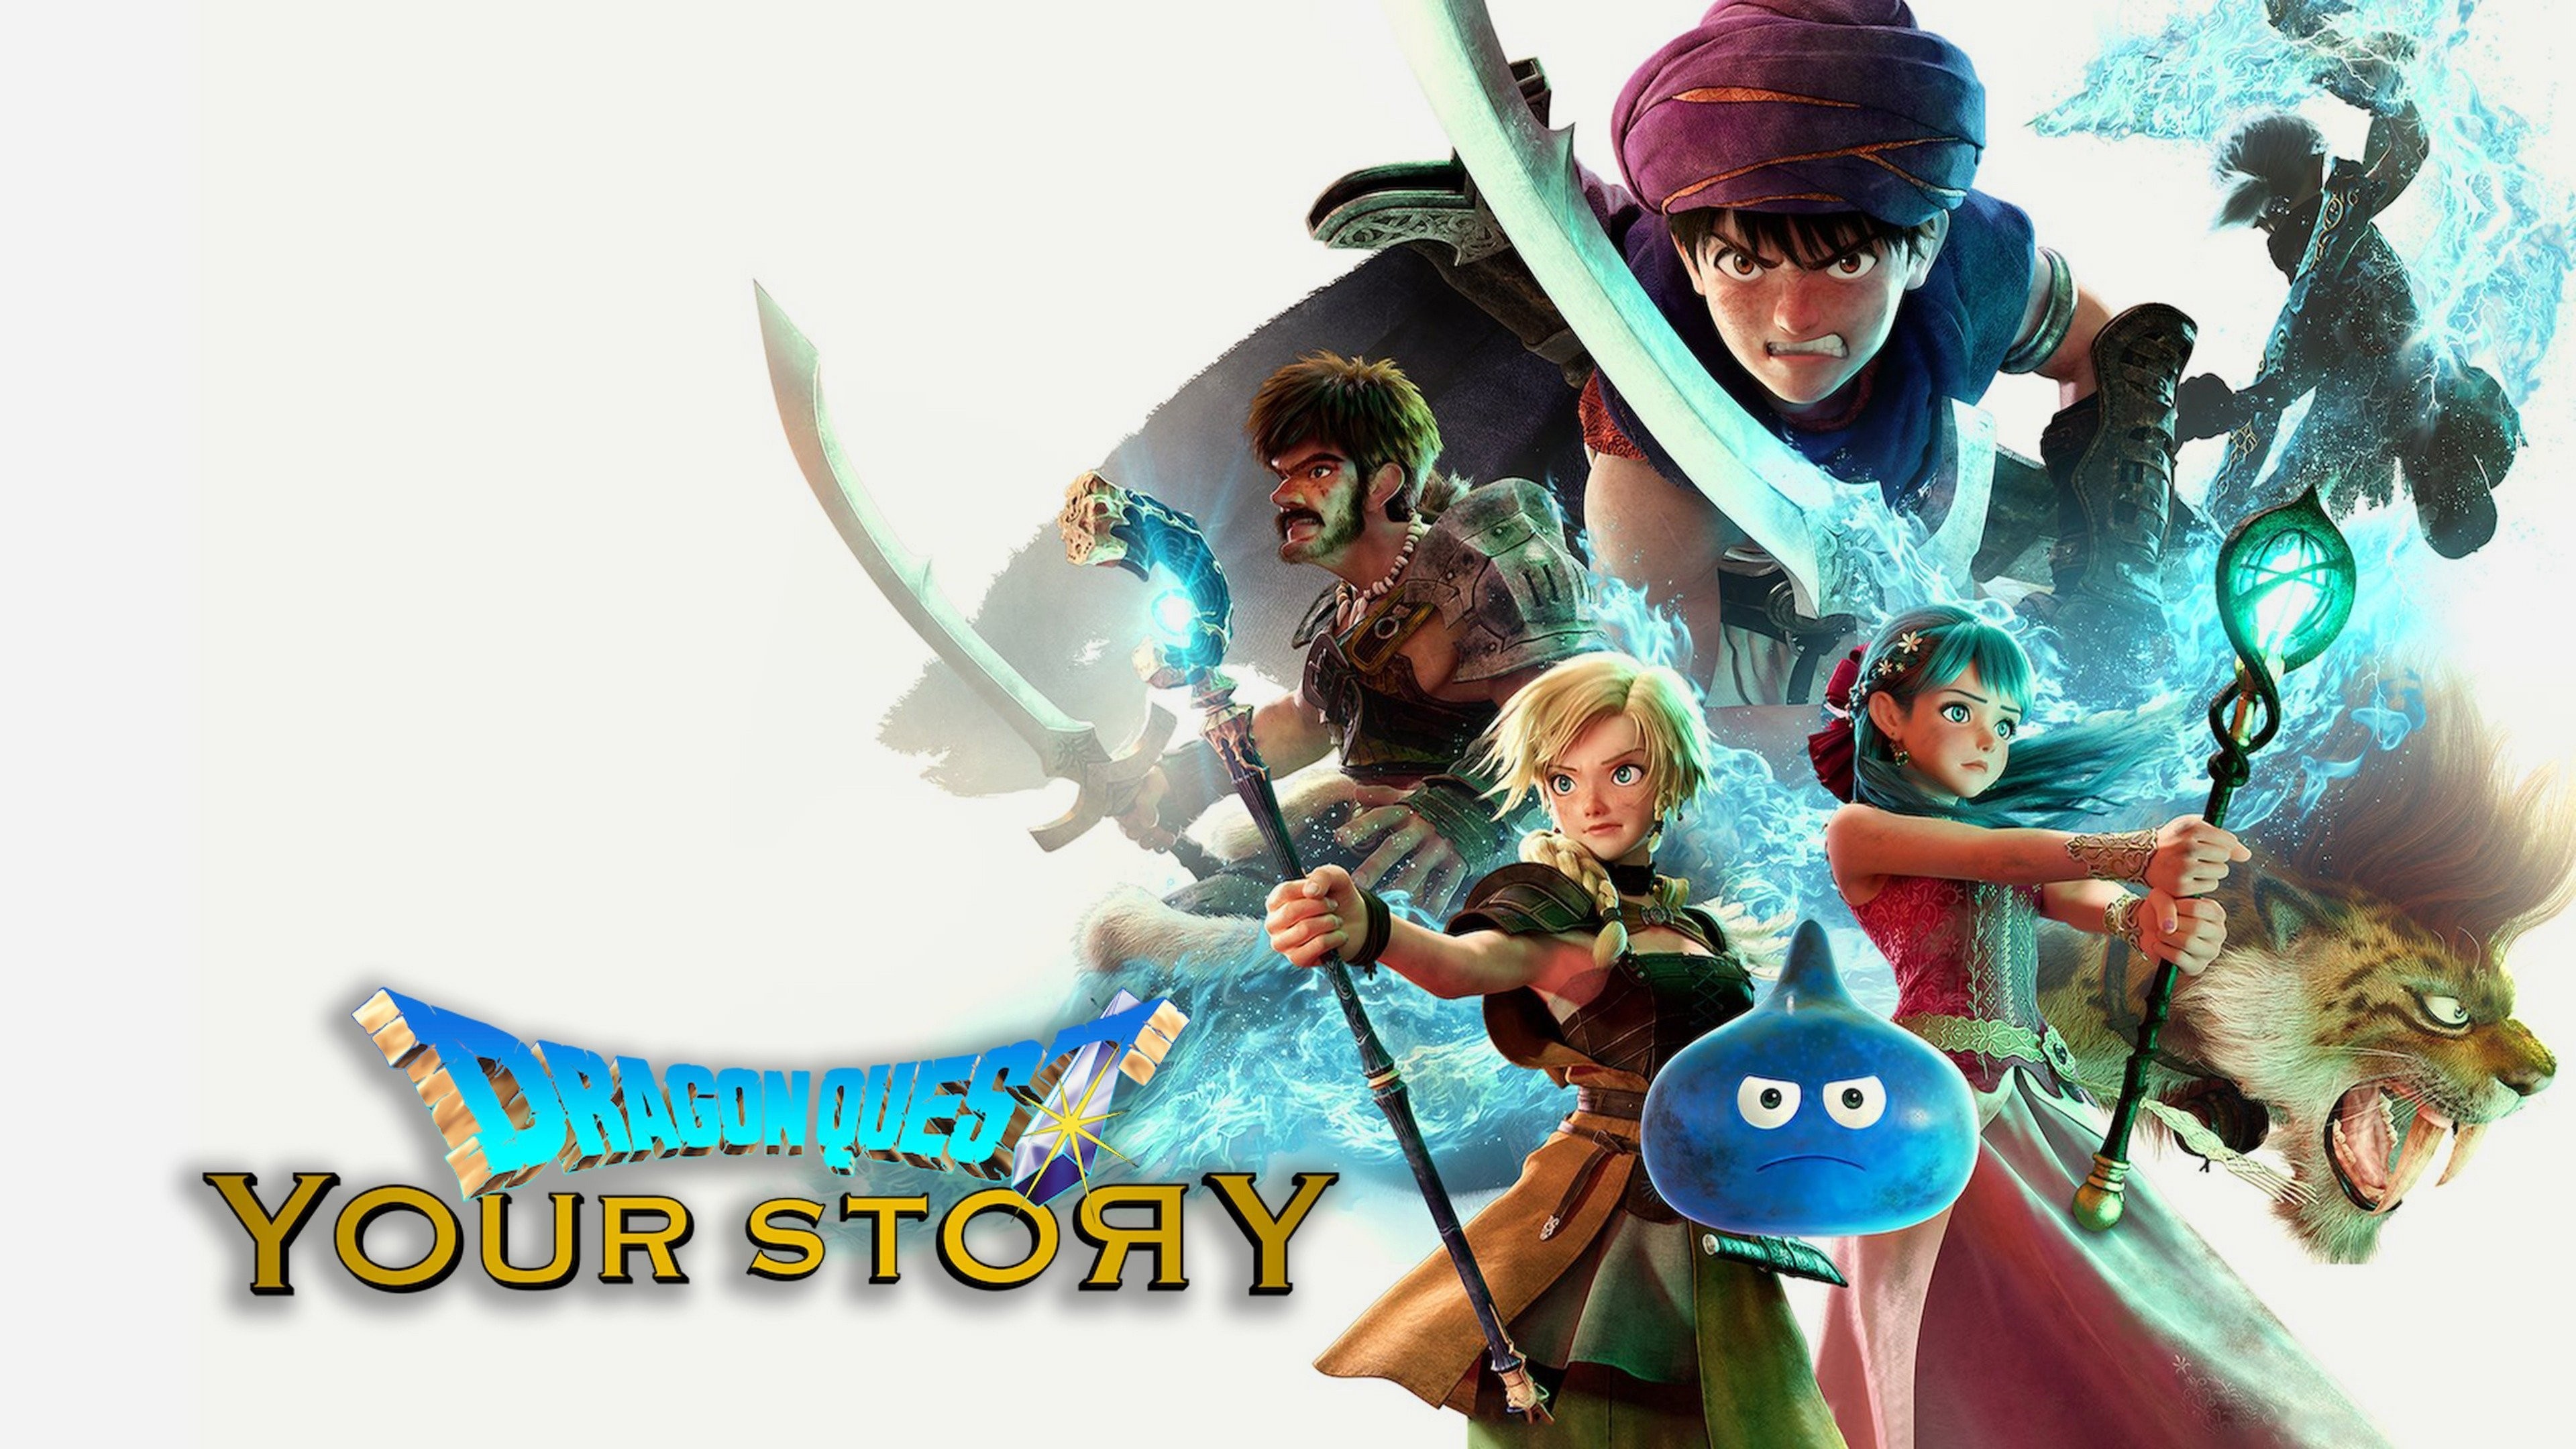 Watch Dragon Quest- Your Story (2019) Full Anime on Kissanimes.cc